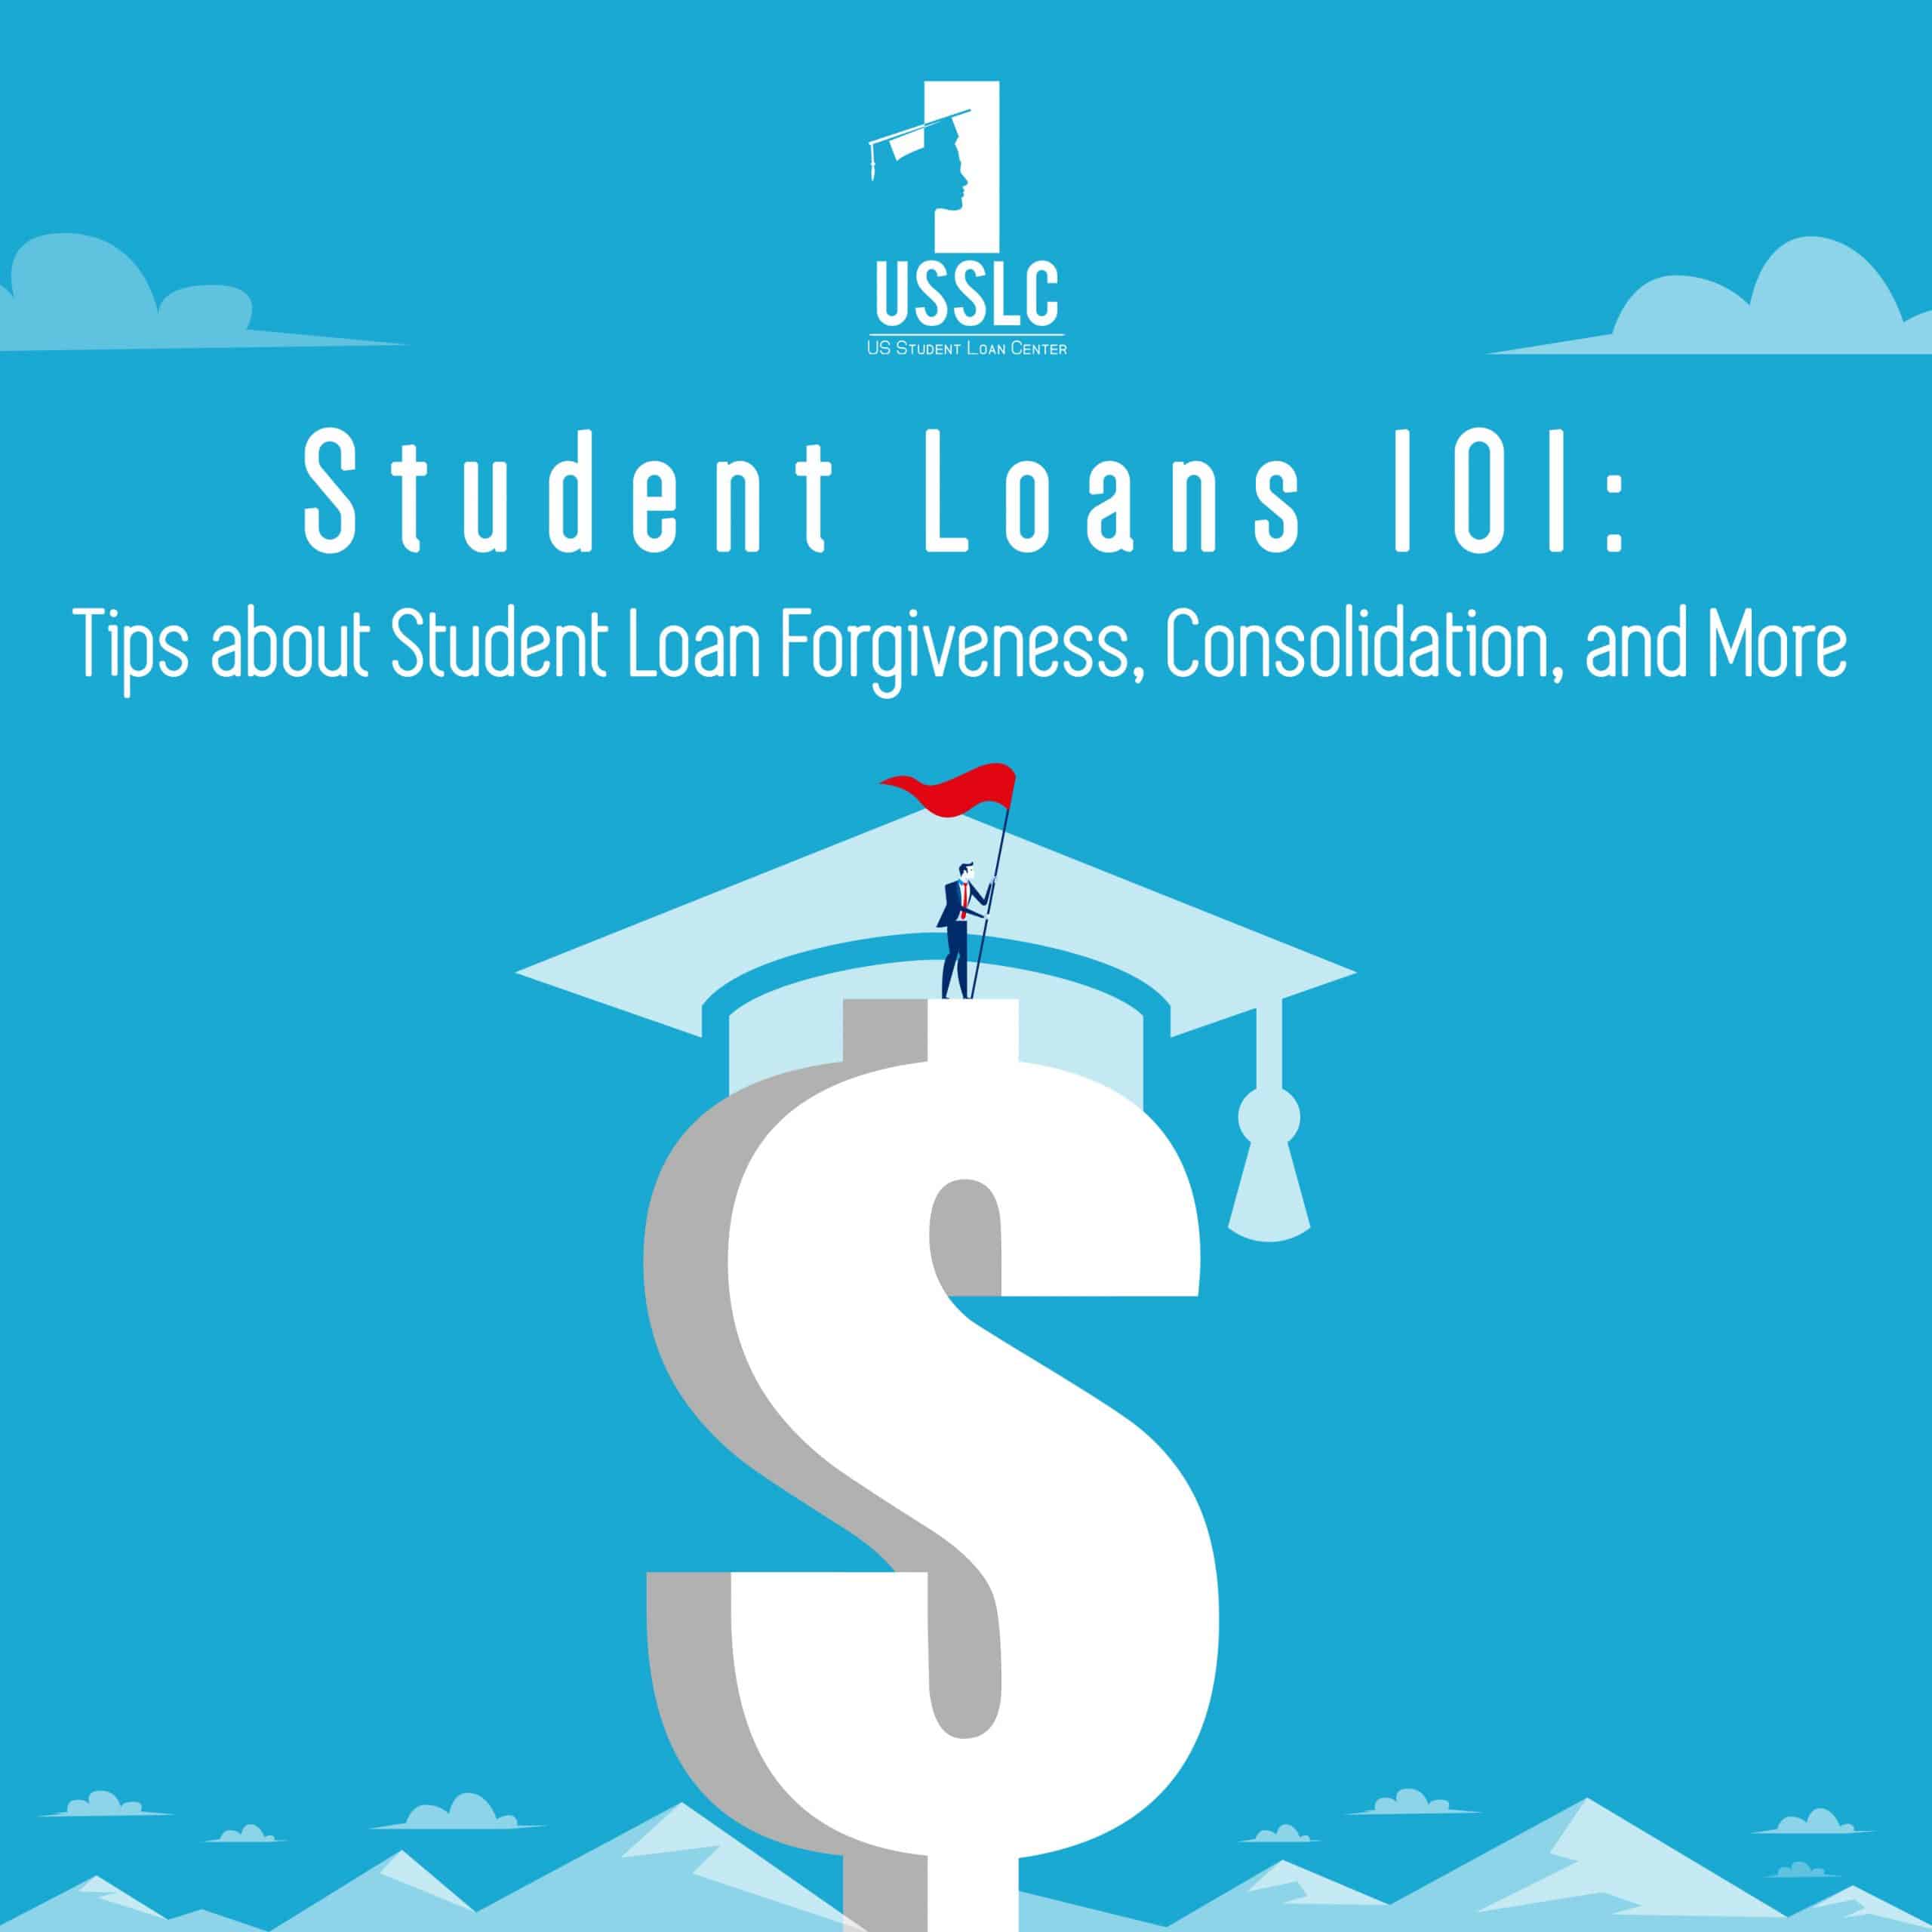 Best Loan Servicer To Consolidate Student Loans